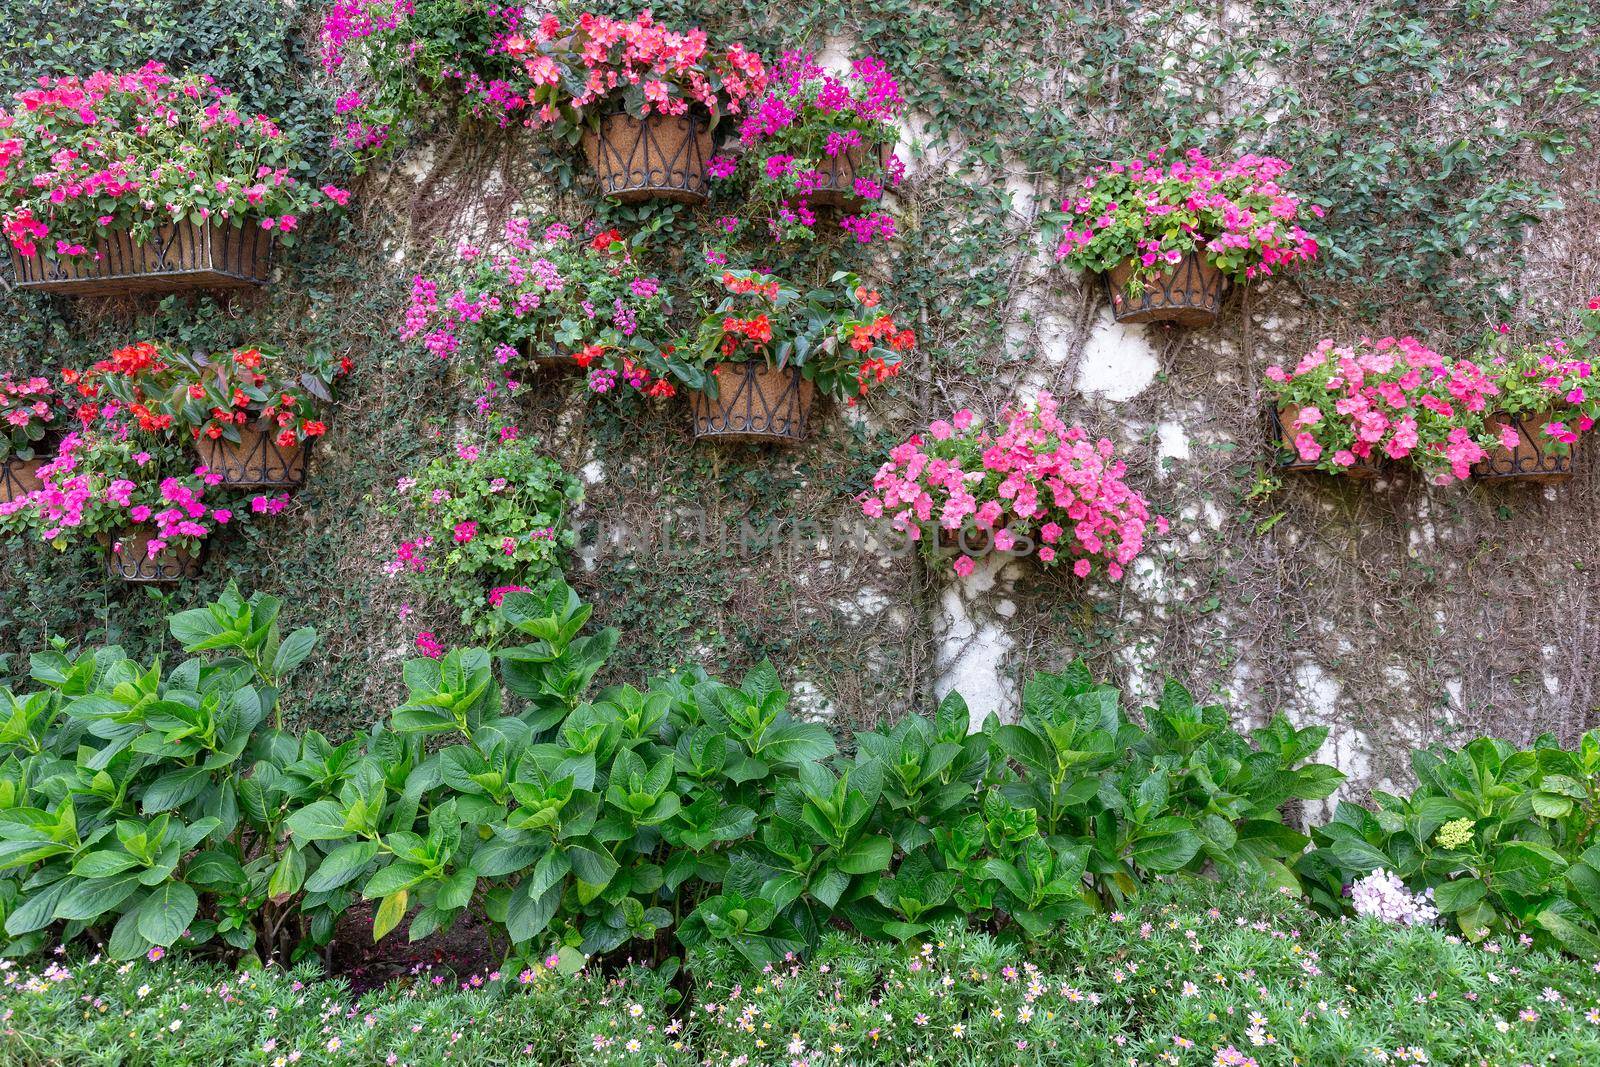 Walls decorated with flowers, many types of flower pots